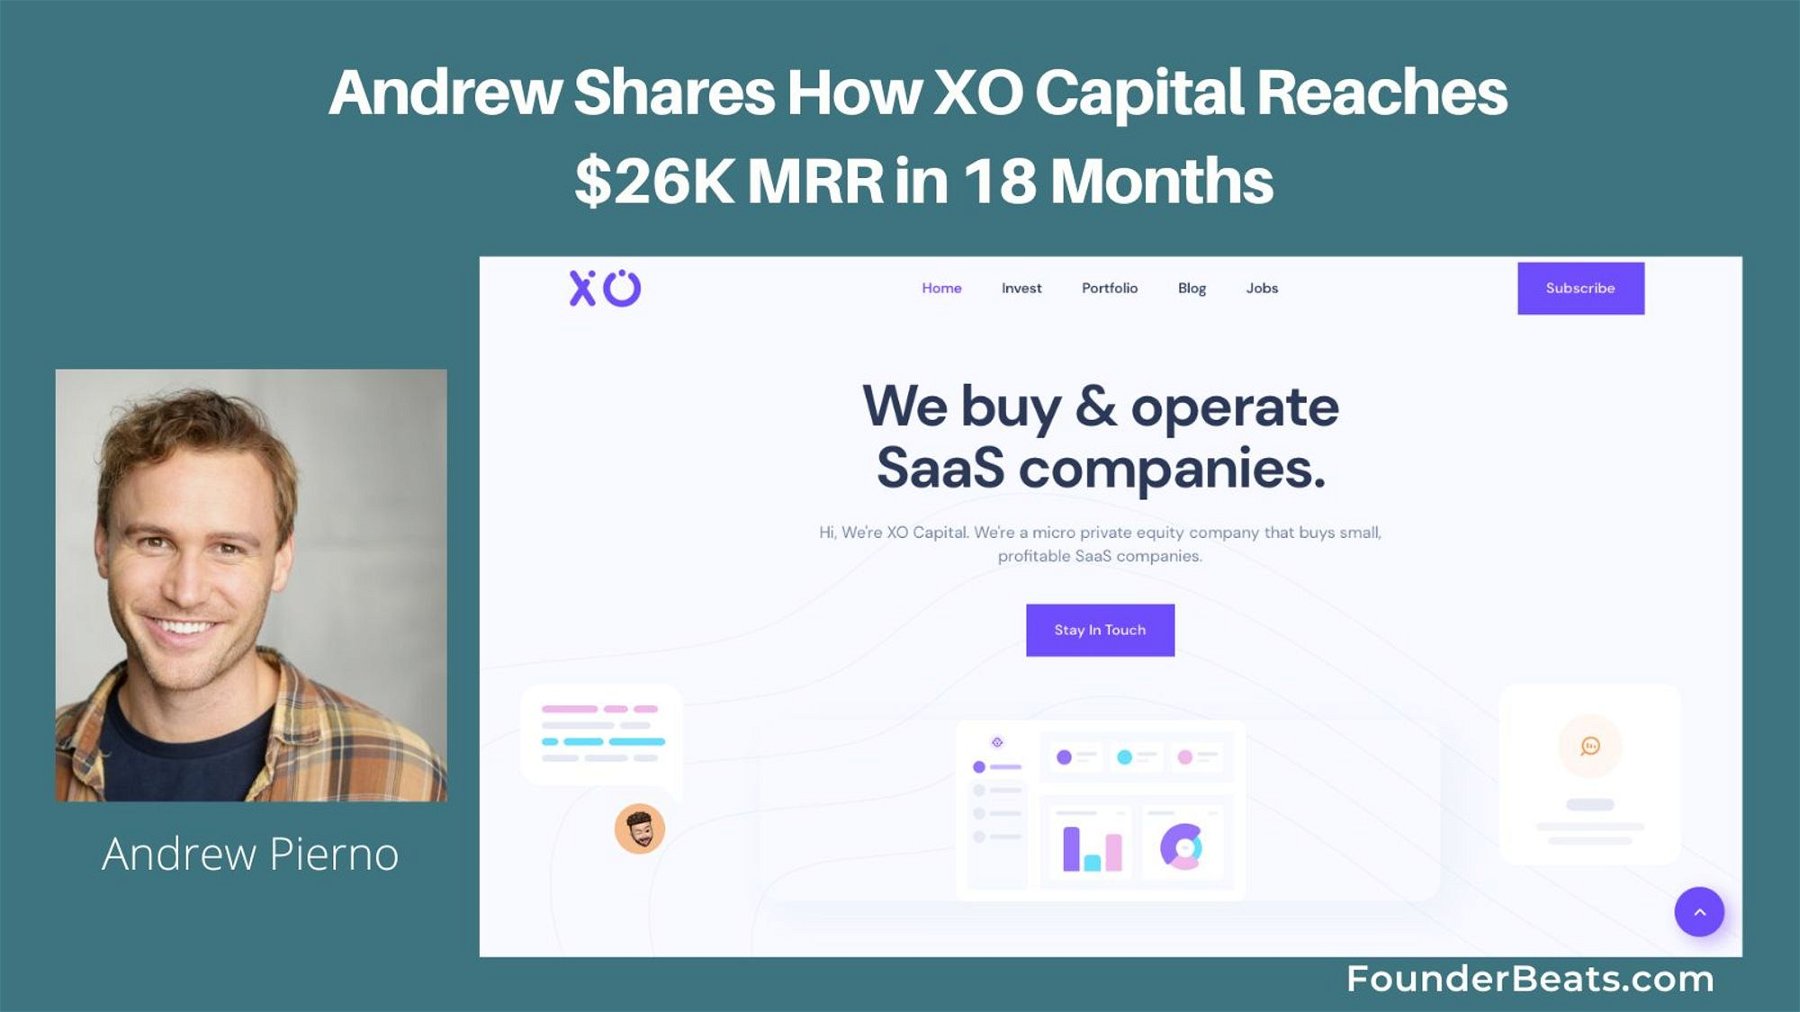 Andrew Shares How XO Capital Reaches $26K MRR in 18 Months